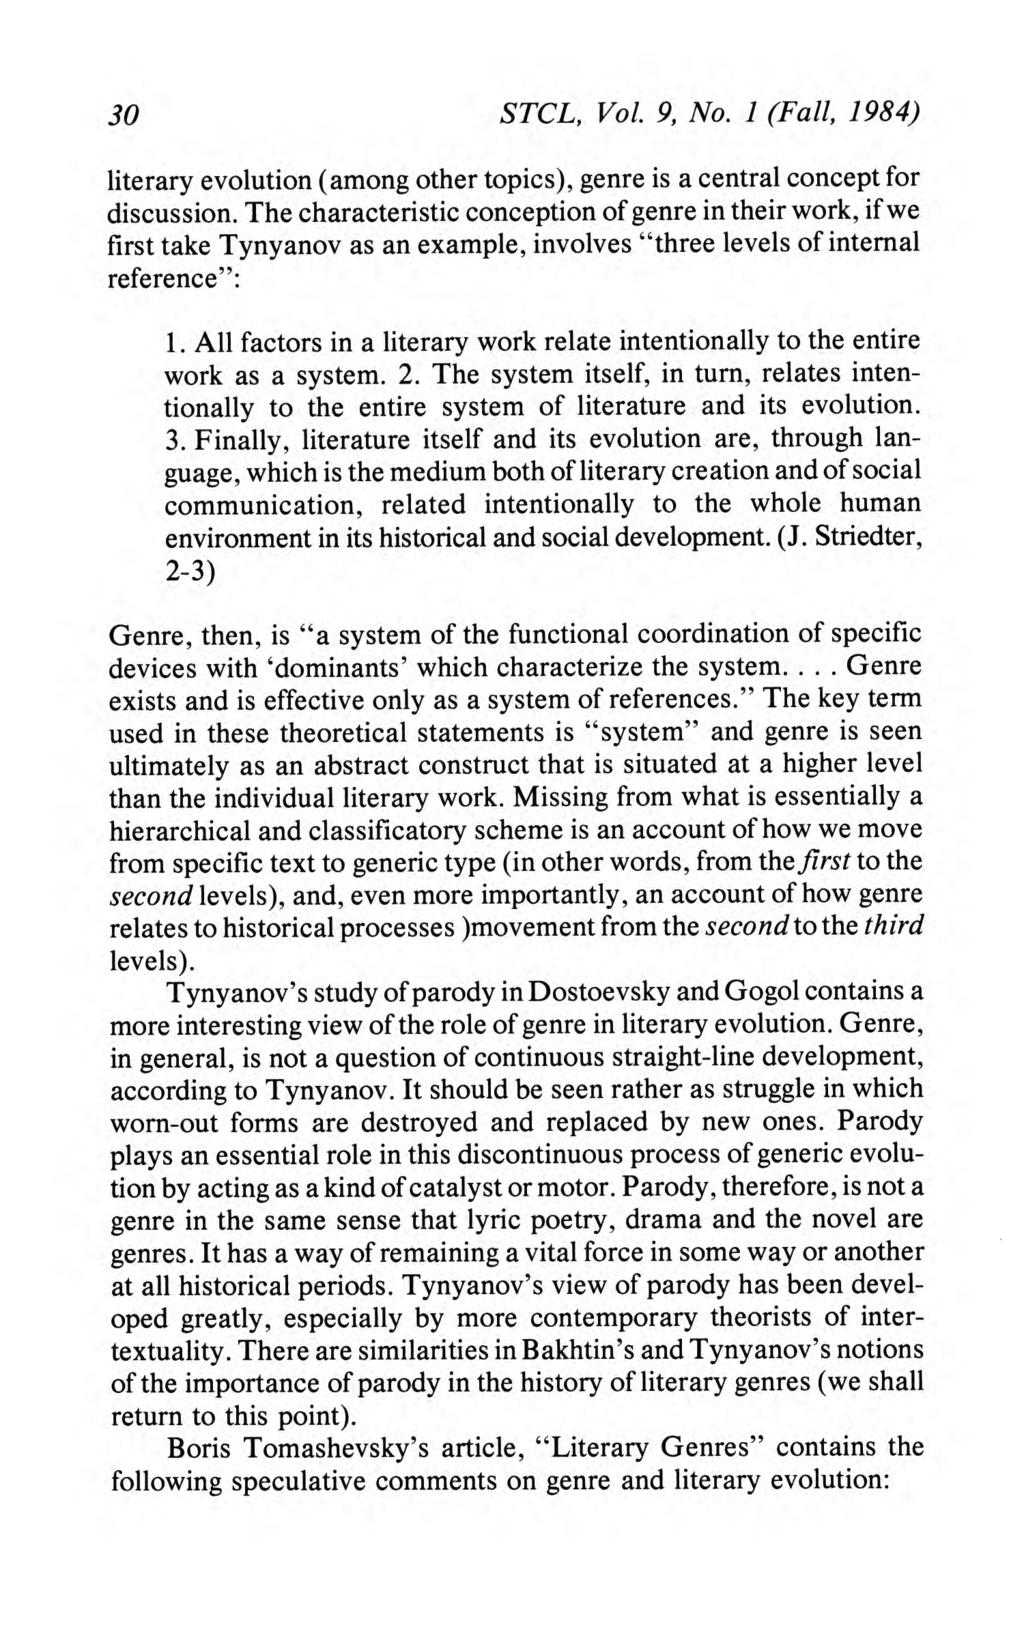 Studies in 20th & 21st Century Literature, Vol. 9, Iss. 1 [1984], Art. 4 30 STCL, Vol. 9, No. 1 (Fall, 1984) literary evolution (among other topics), genre is a central concept for discussion.